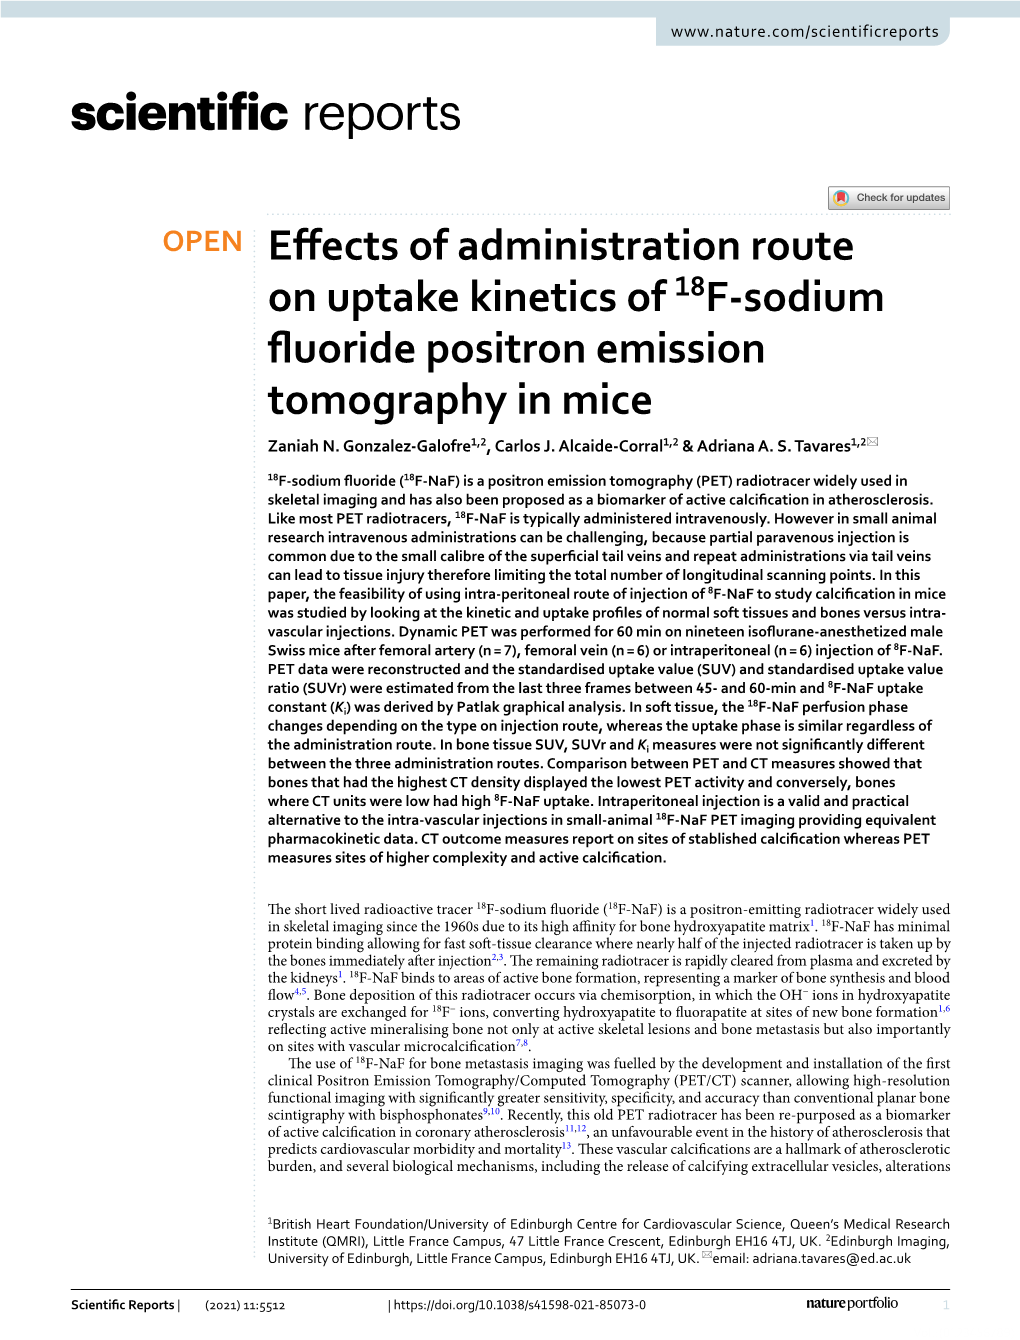 Effects of Administration Route on Uptake Kinetics of 18F-Sodium